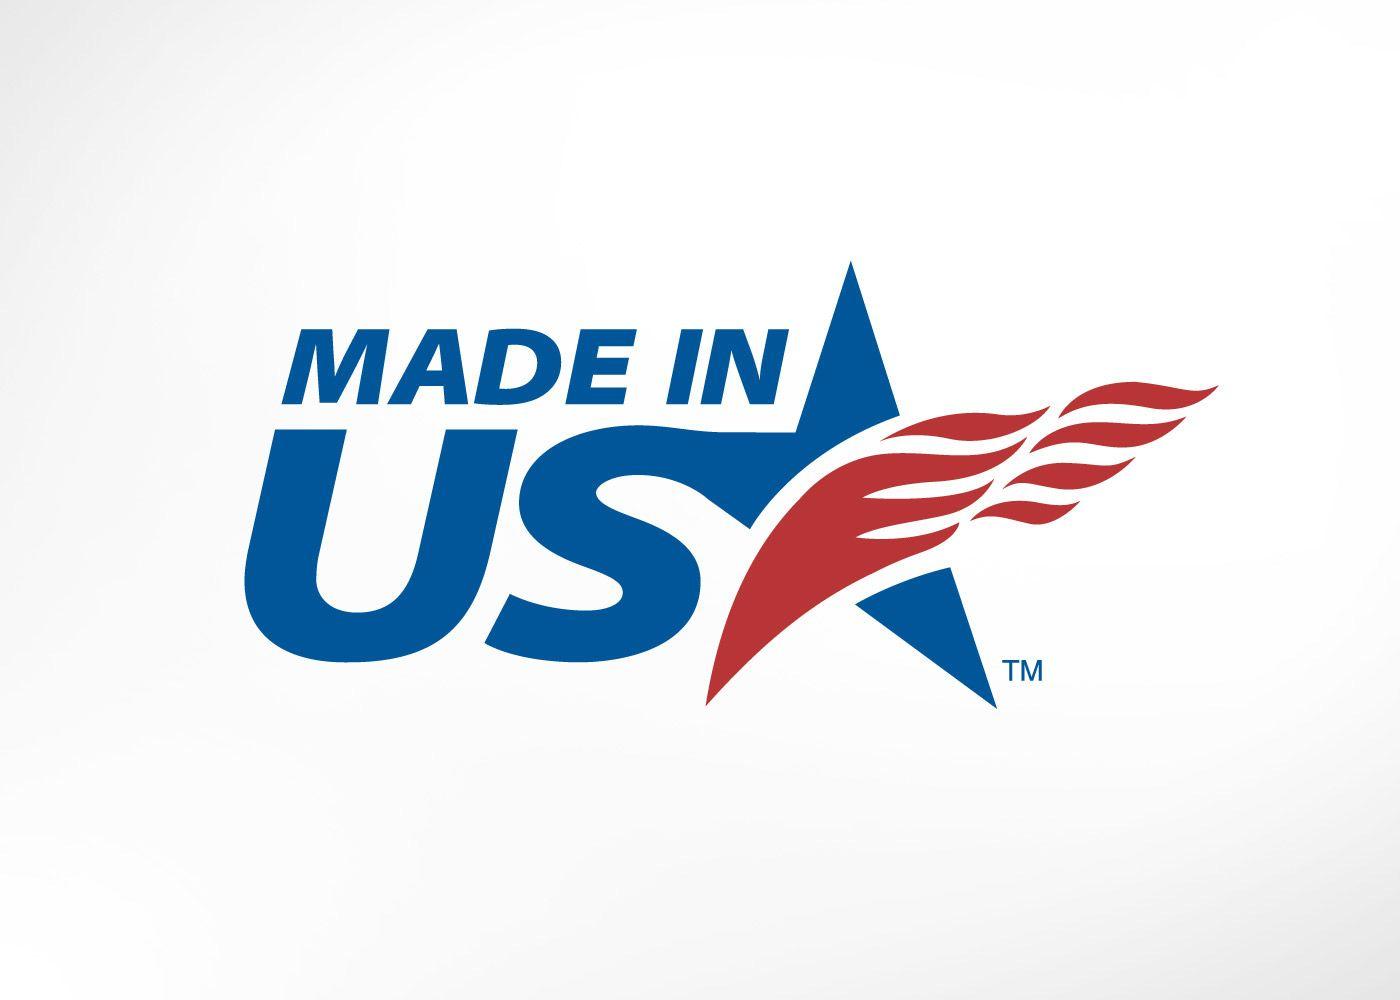 Made in USA Logo - BRANDING :: Made In USA Logo (Royalty-Free :: For Sale) on Behance